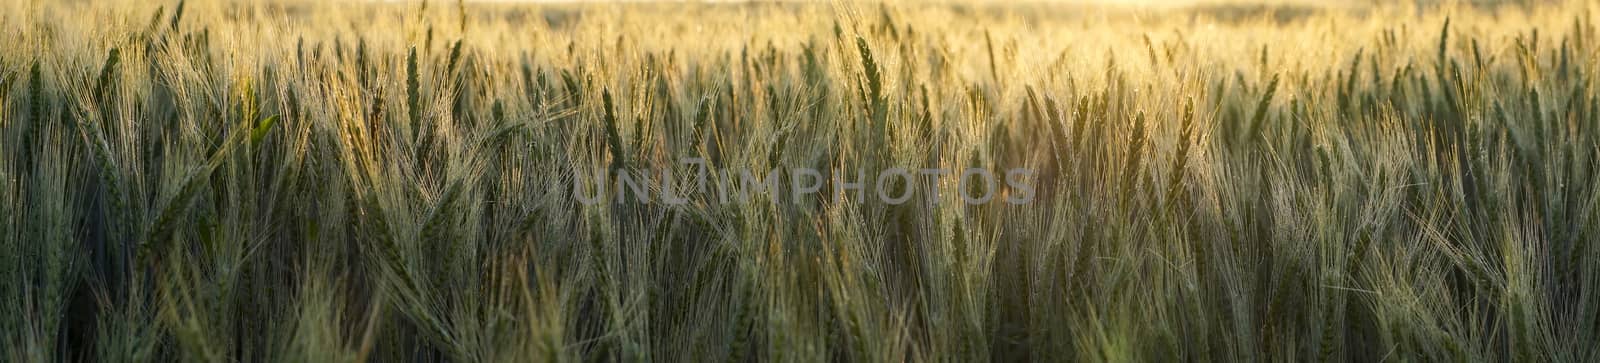 Panorama banner of backlit wheat at sunset by NetPix